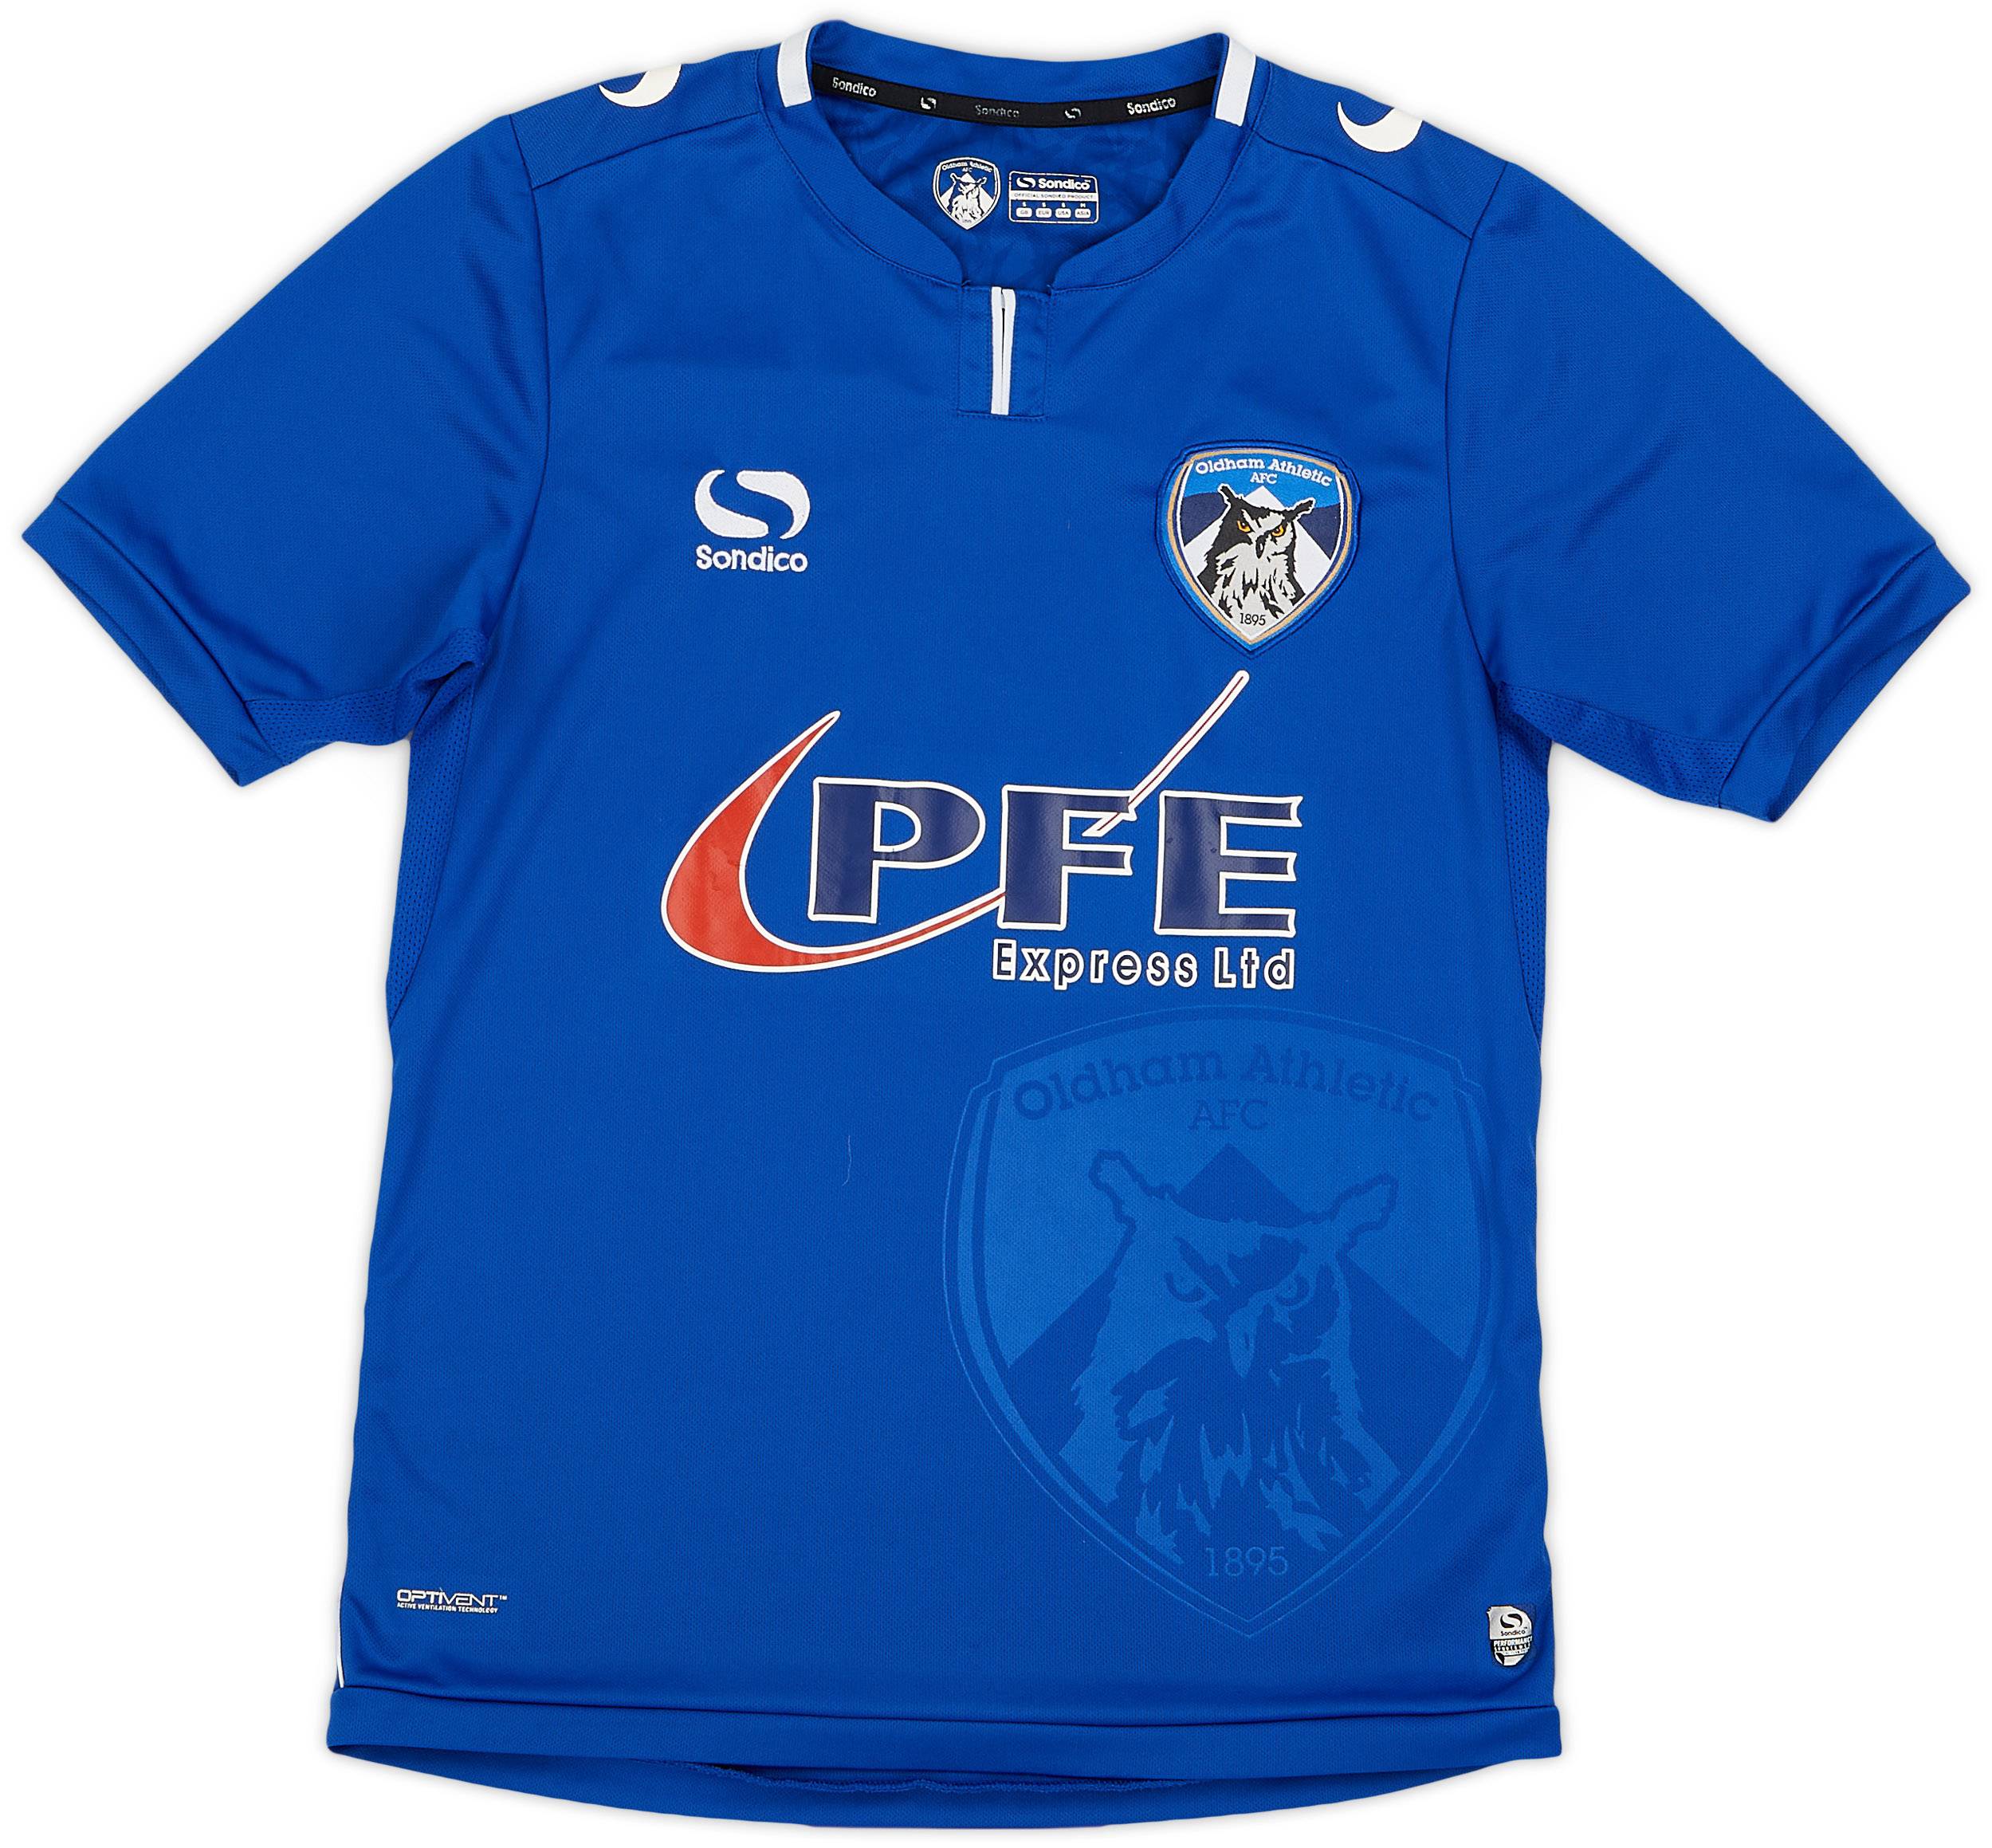 2017-18 Oldham Home Shirt - 8/10 - (S)